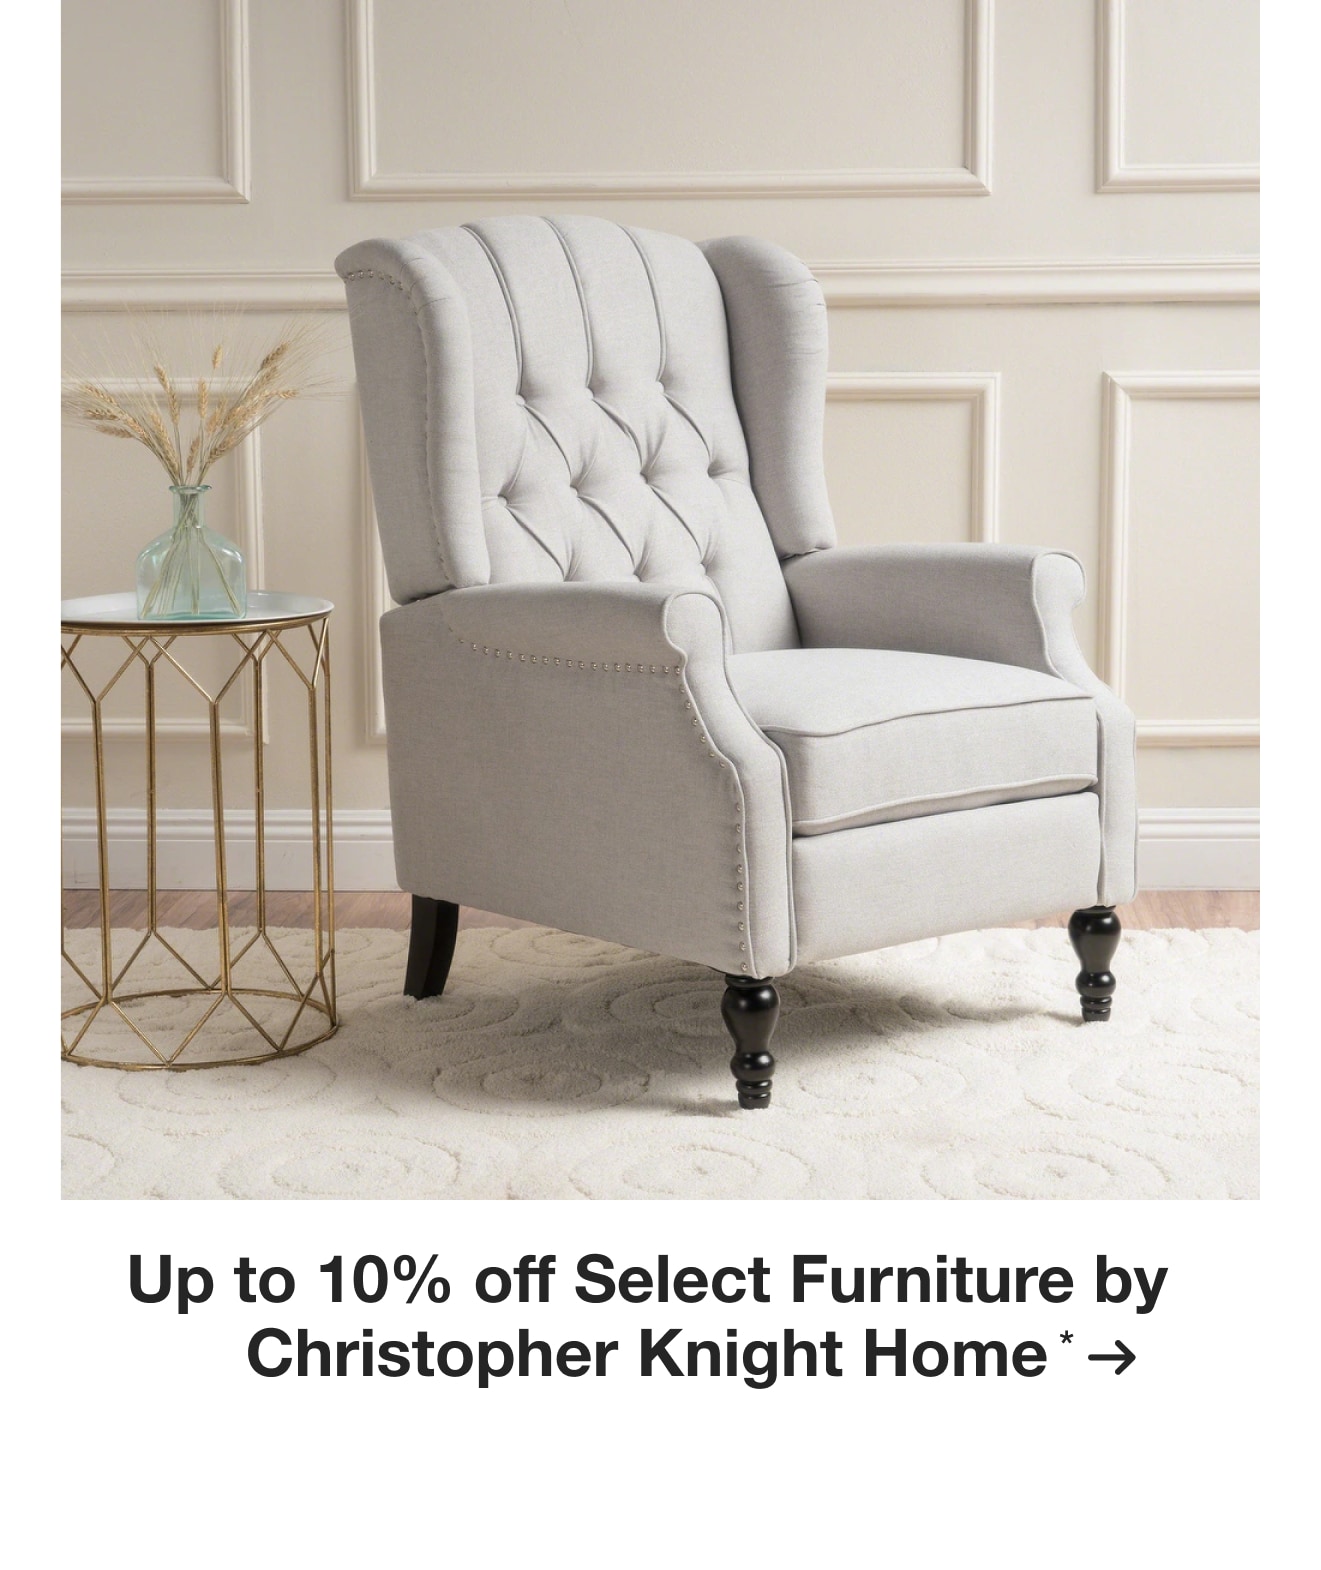 Up to 10% off Select Furniture by Christopher Knight Home*